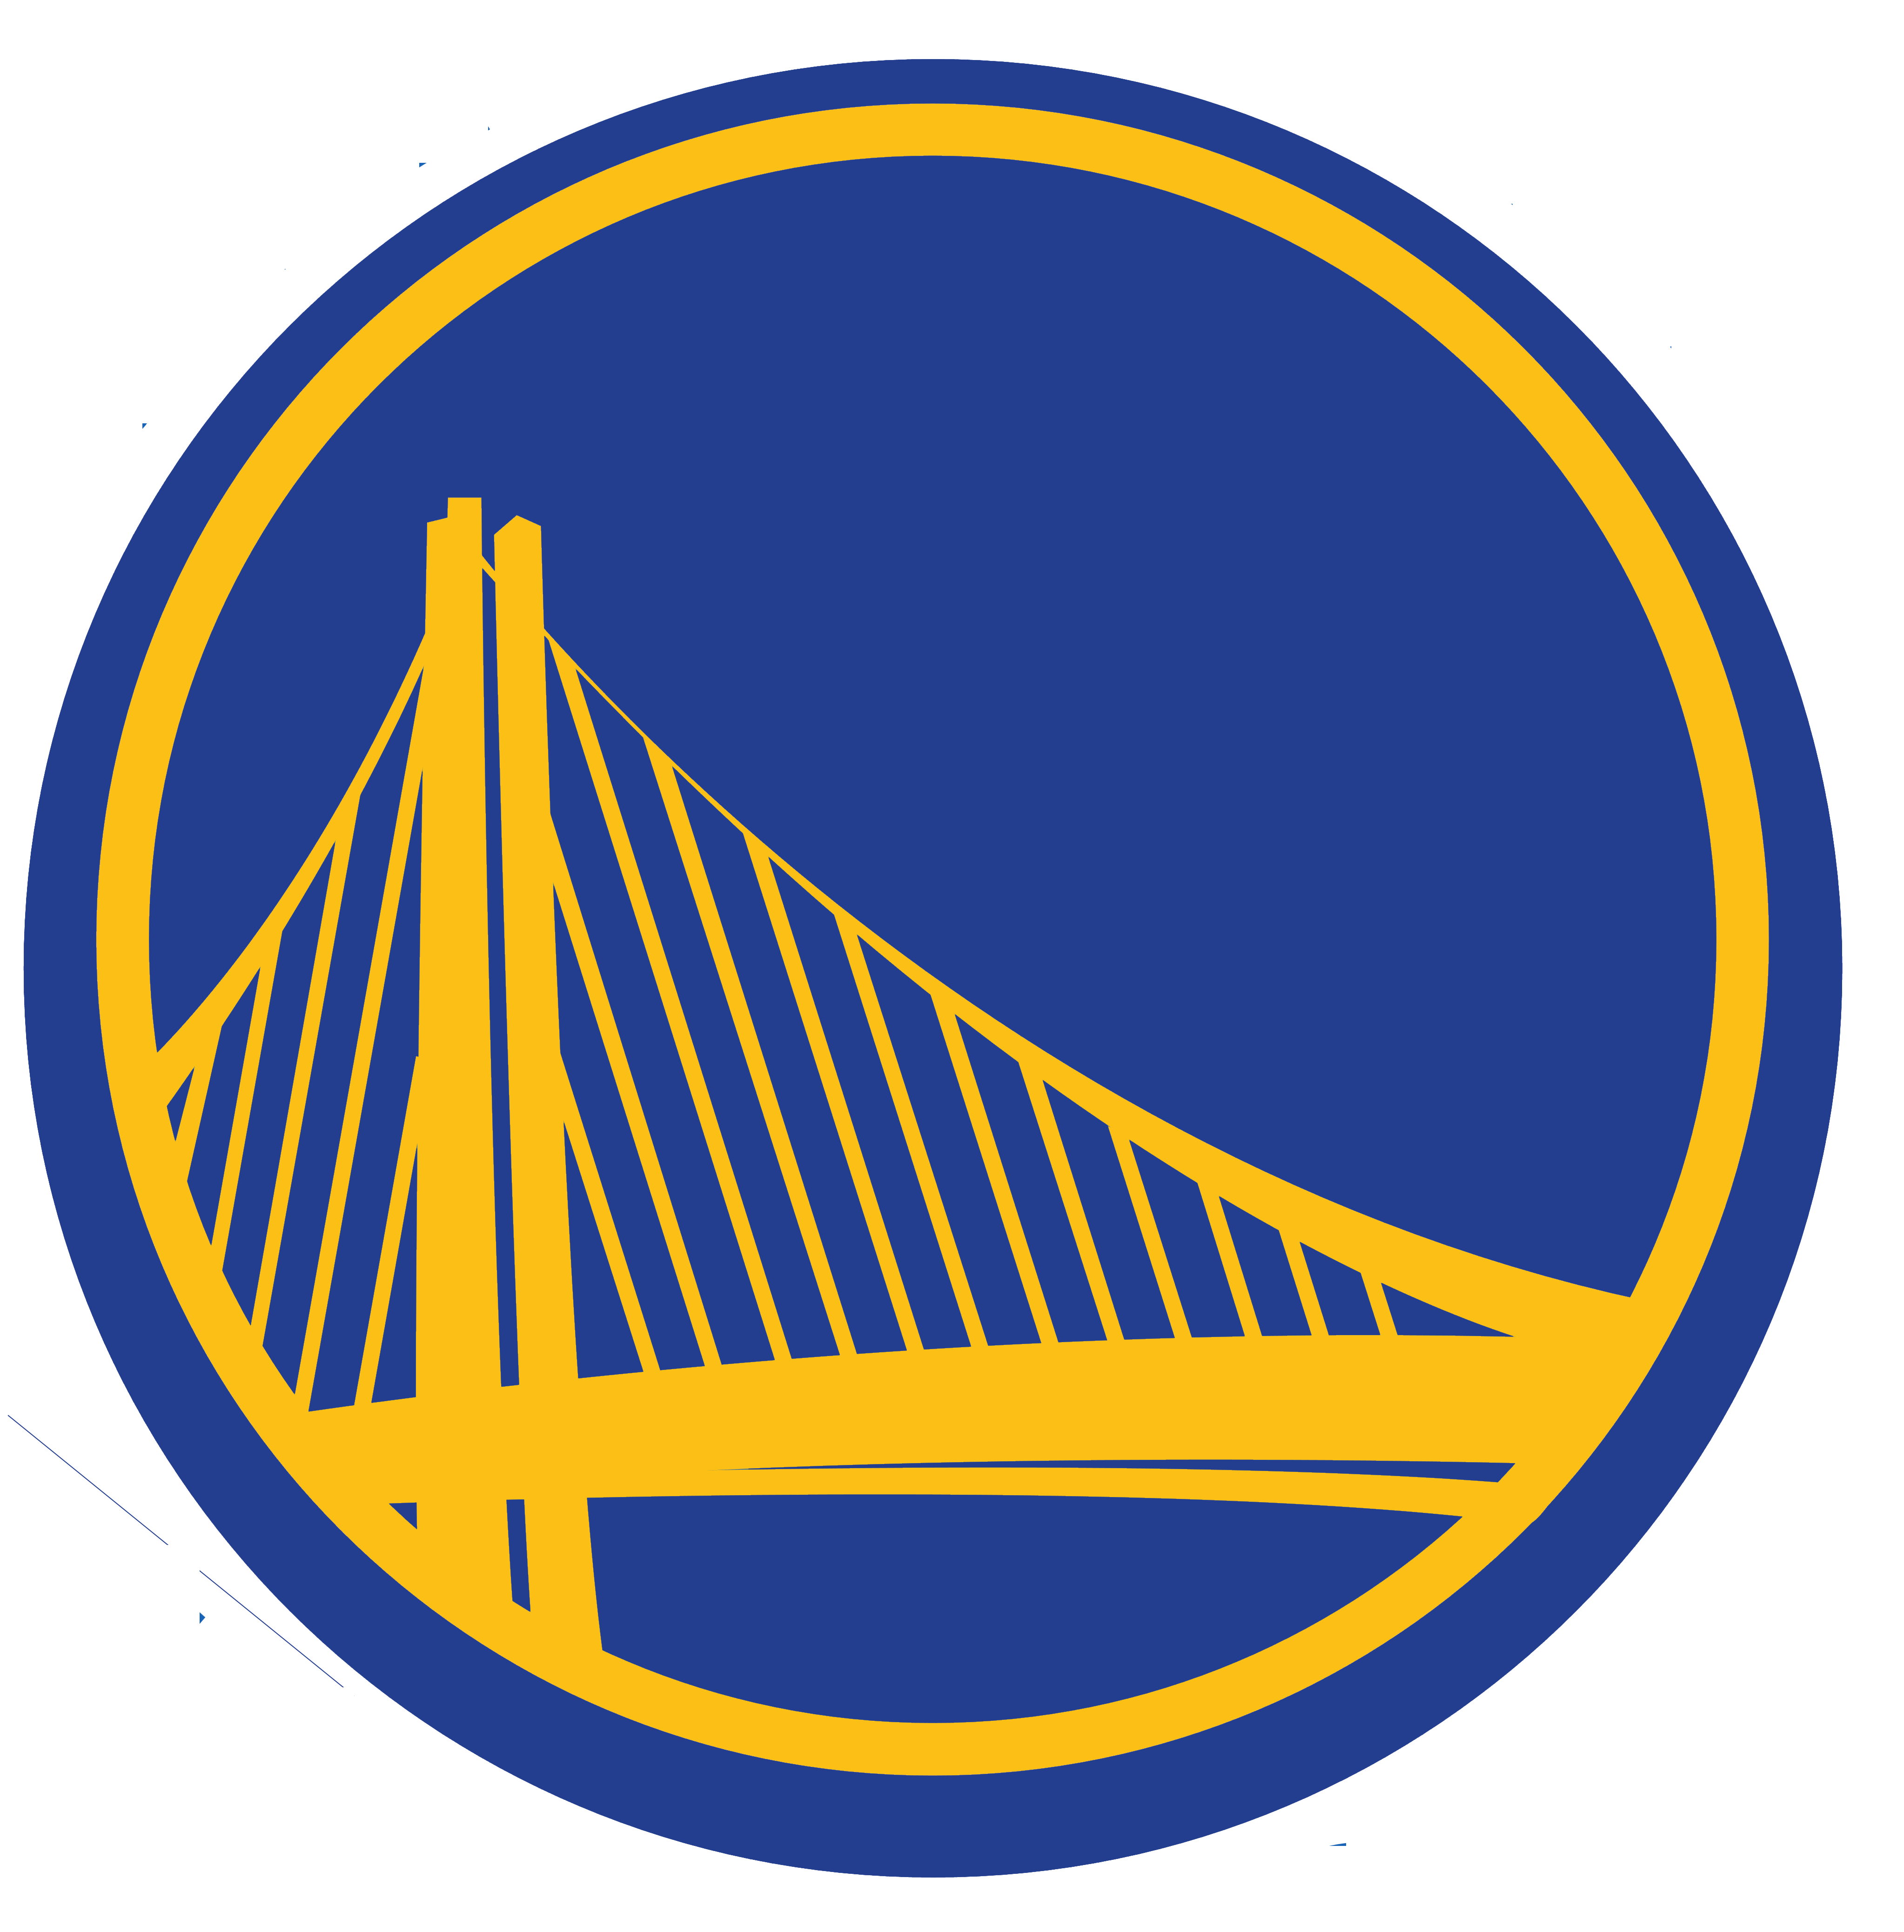 Golden State Warriors PNG Photo